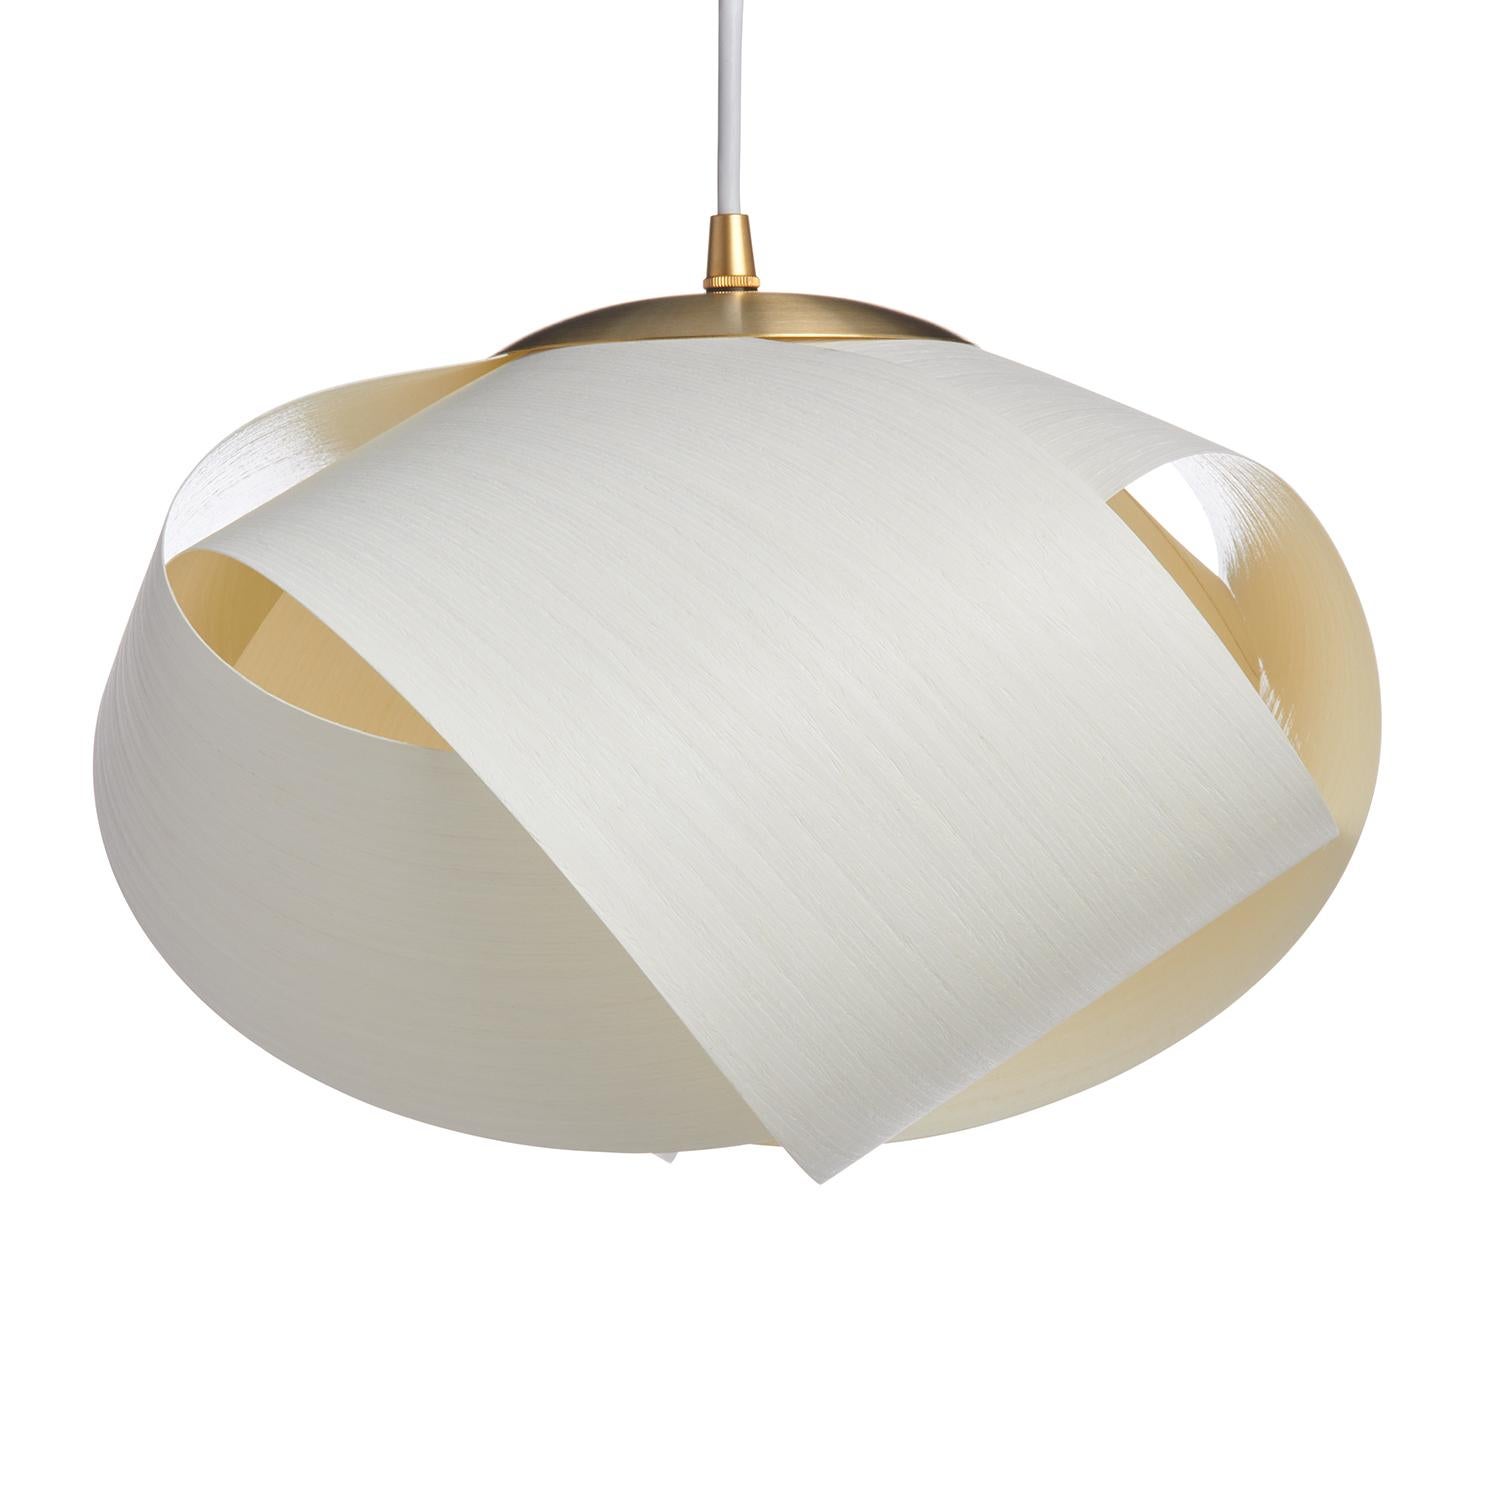 Contemporary Scandinavian Design White Eco Wood Pendant with Brushed Brass